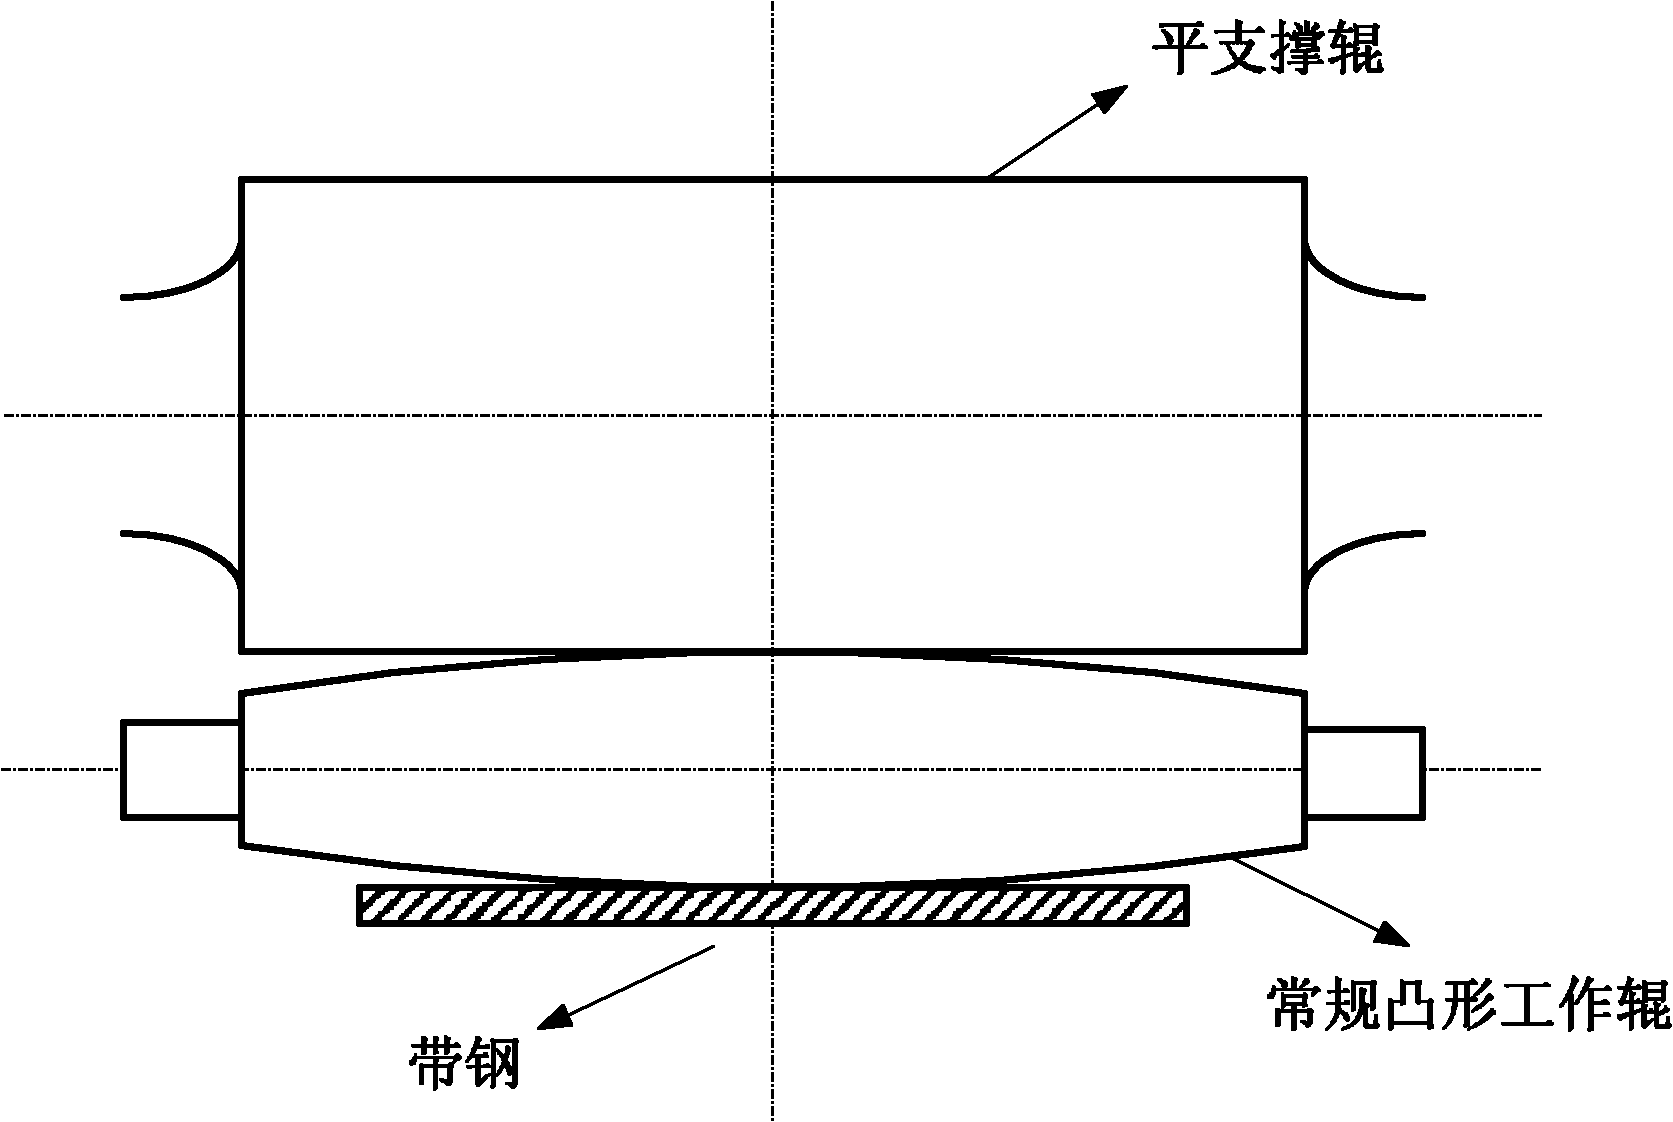 Configuration method of medium and heavy plate roll system with consideration of both rolling stability and cross-section shape